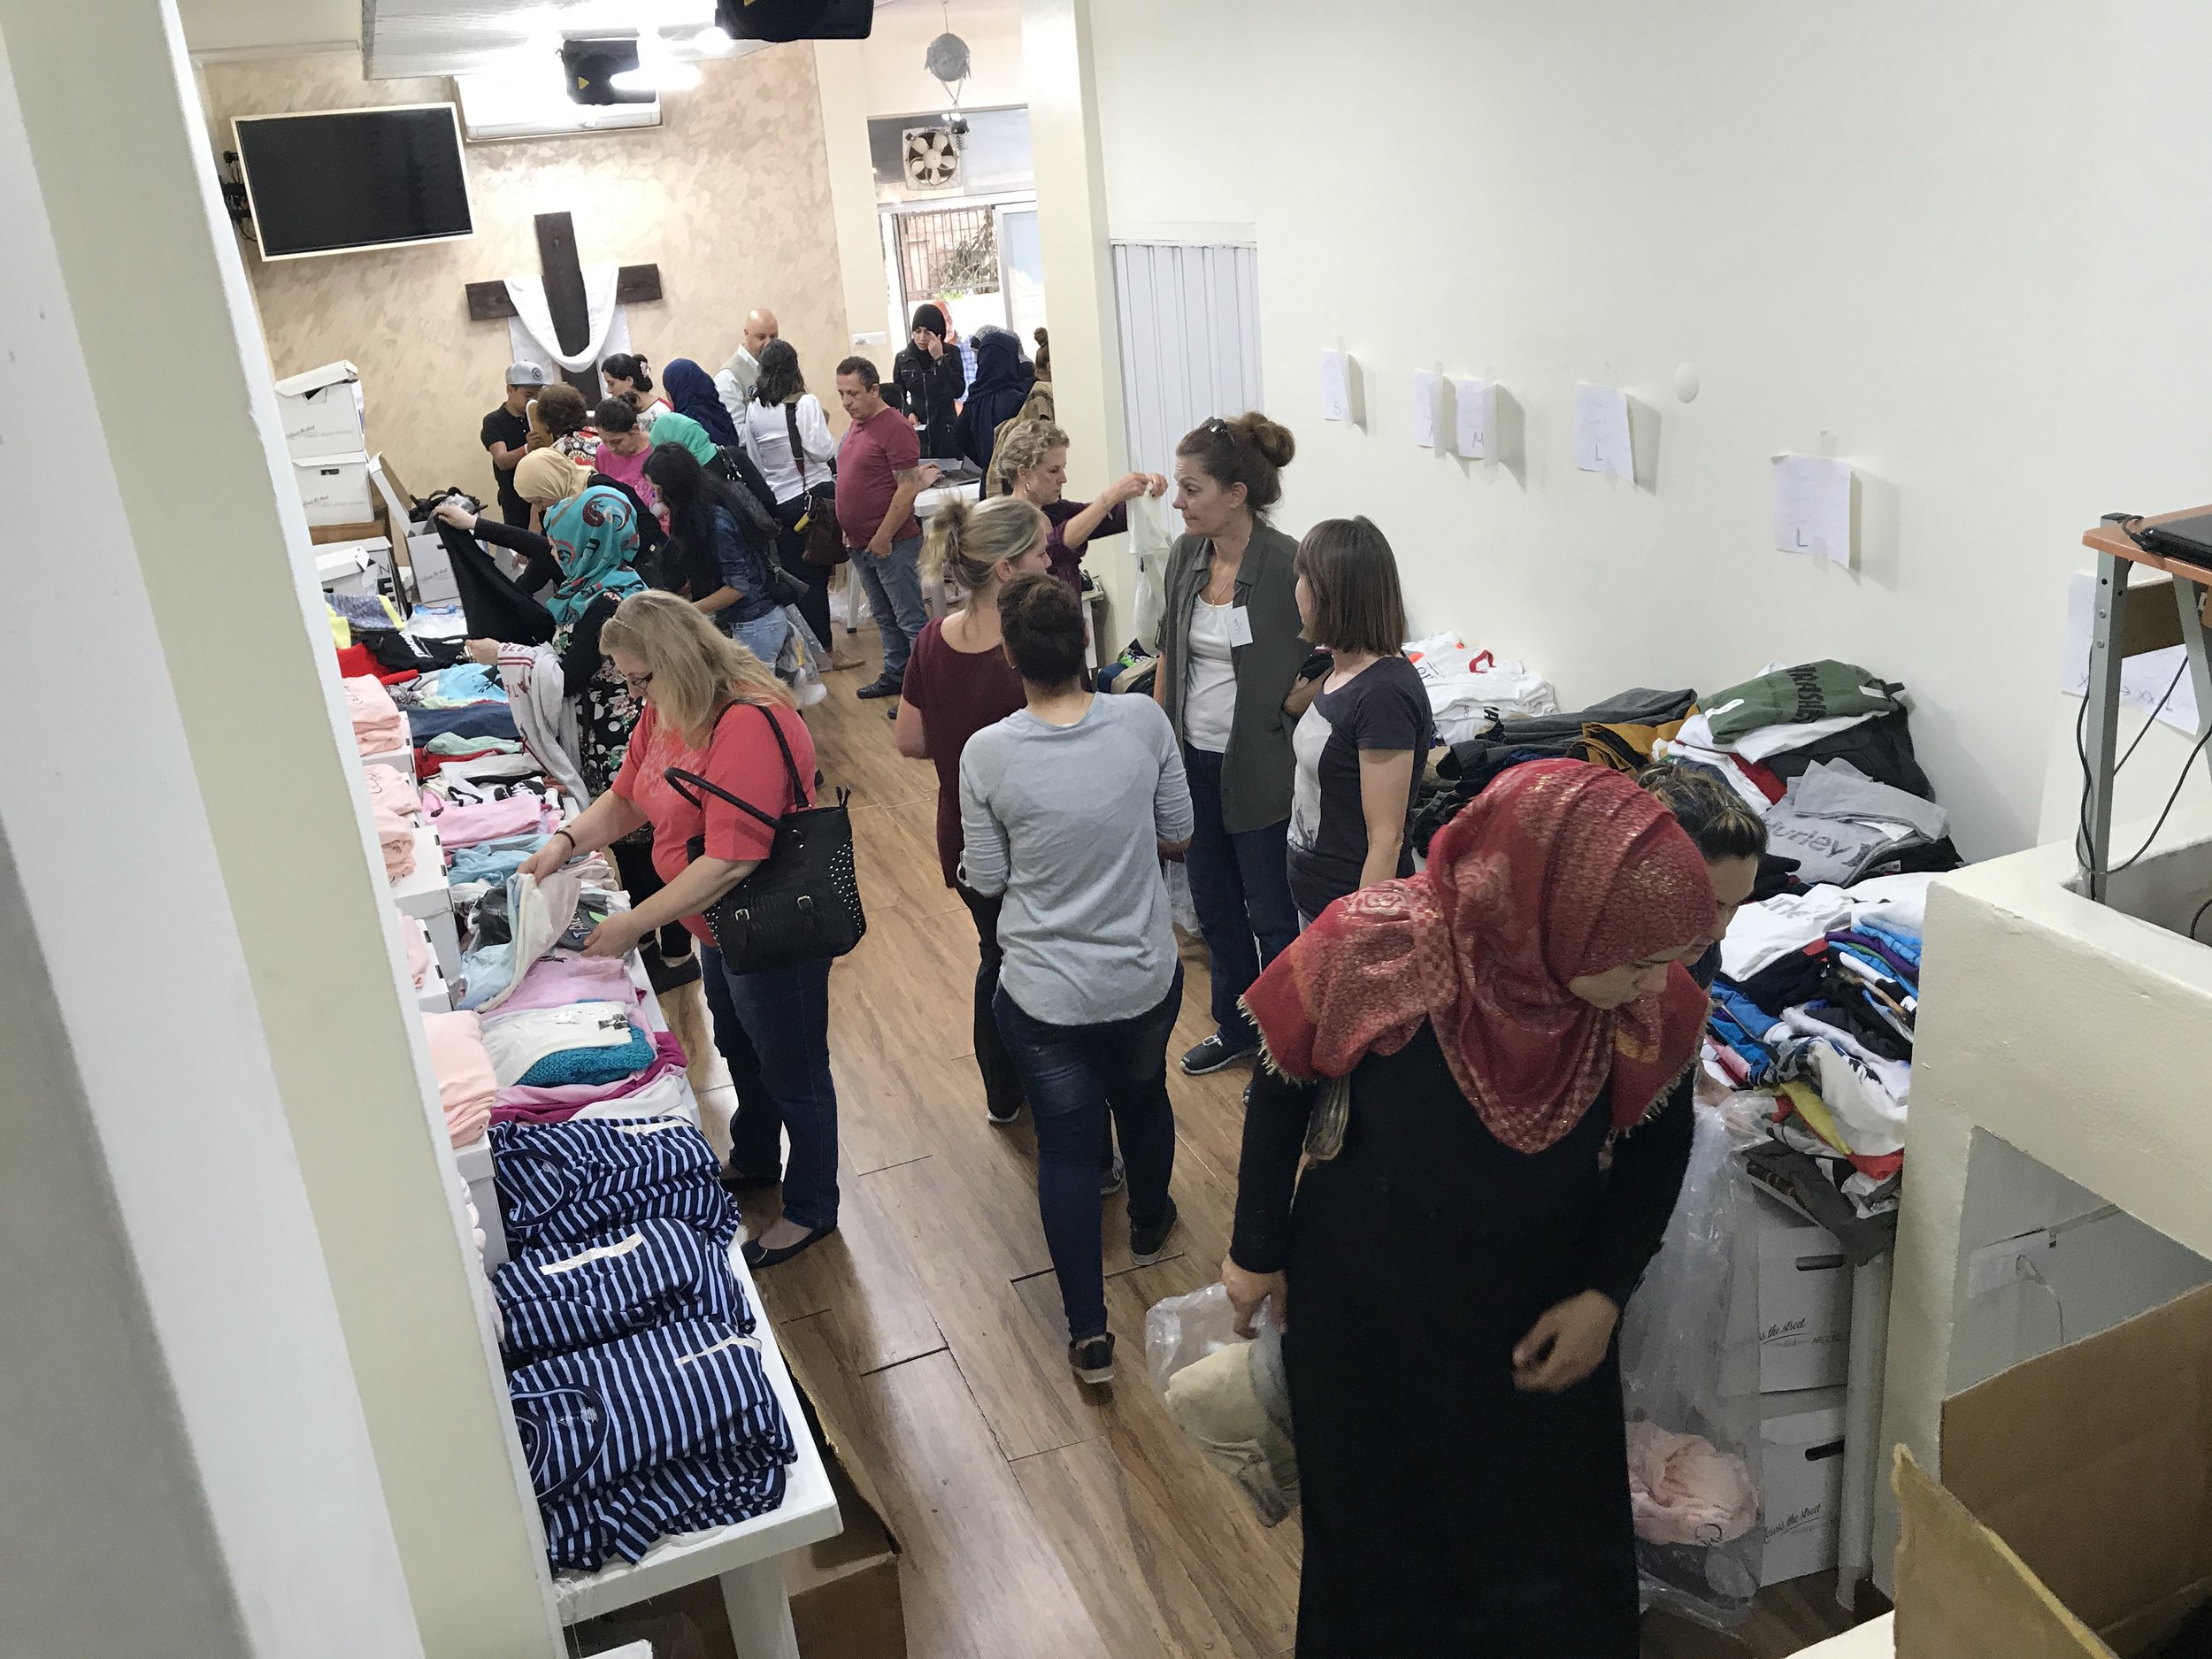 Refugee women "shop" for clothes for their families